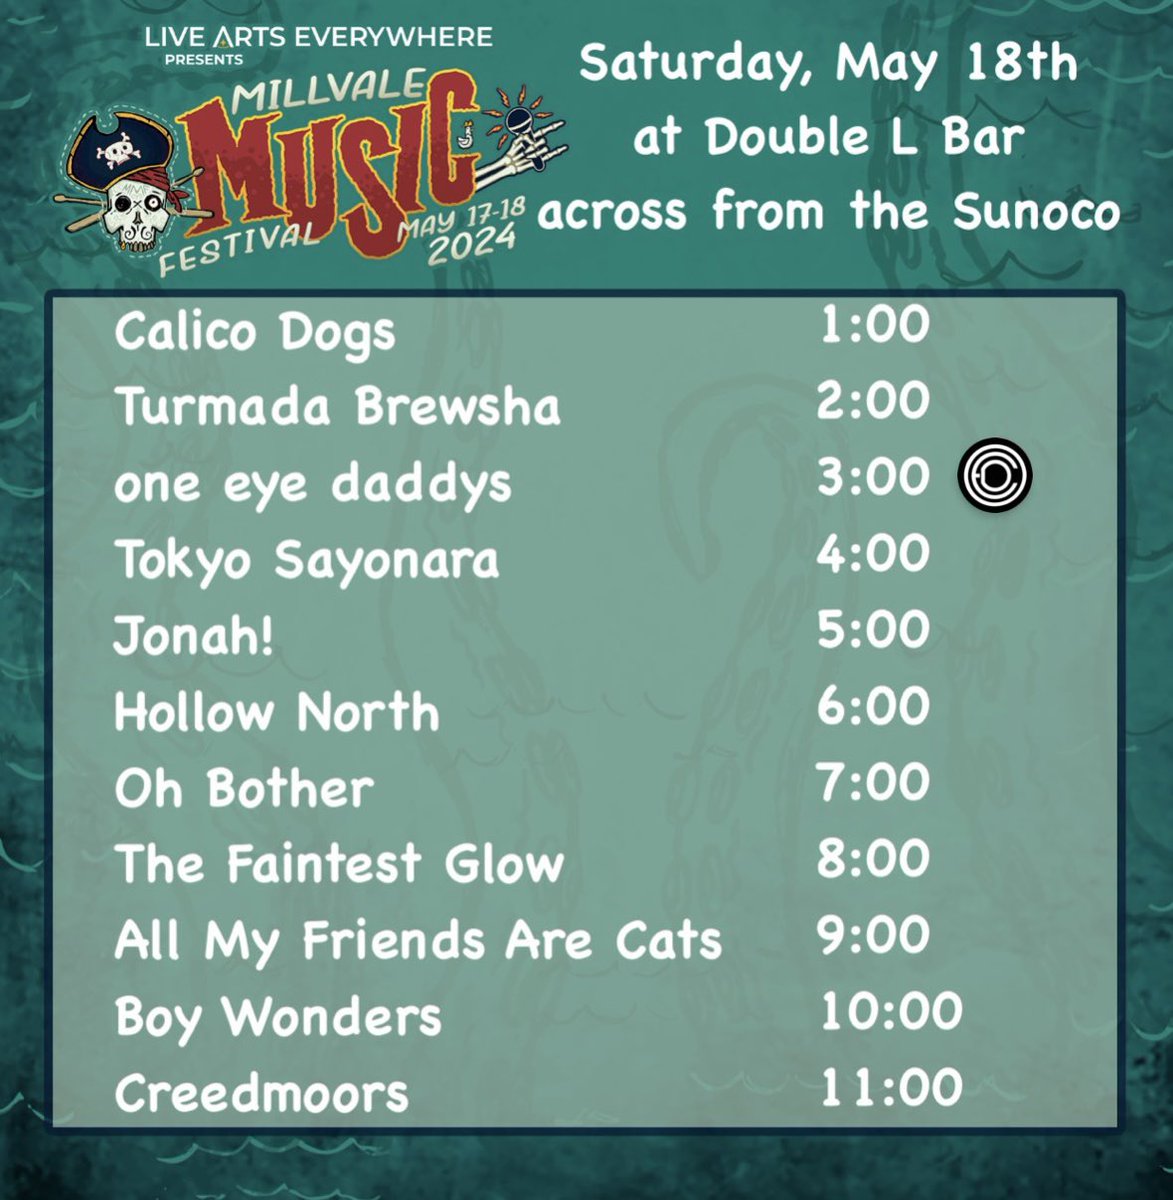 @millvale_music Next weekend! Free music! @doubleLbar is the place to be! 11 bangin’ bands! Check it out! #mmf2024 #oneeyedaddys #alternativerock #music #pittsburghmusicscene #pittsburghmusic #thingstodoinpittsburgh #Rockandroll #indierock #party #friends #supportlocalmusic